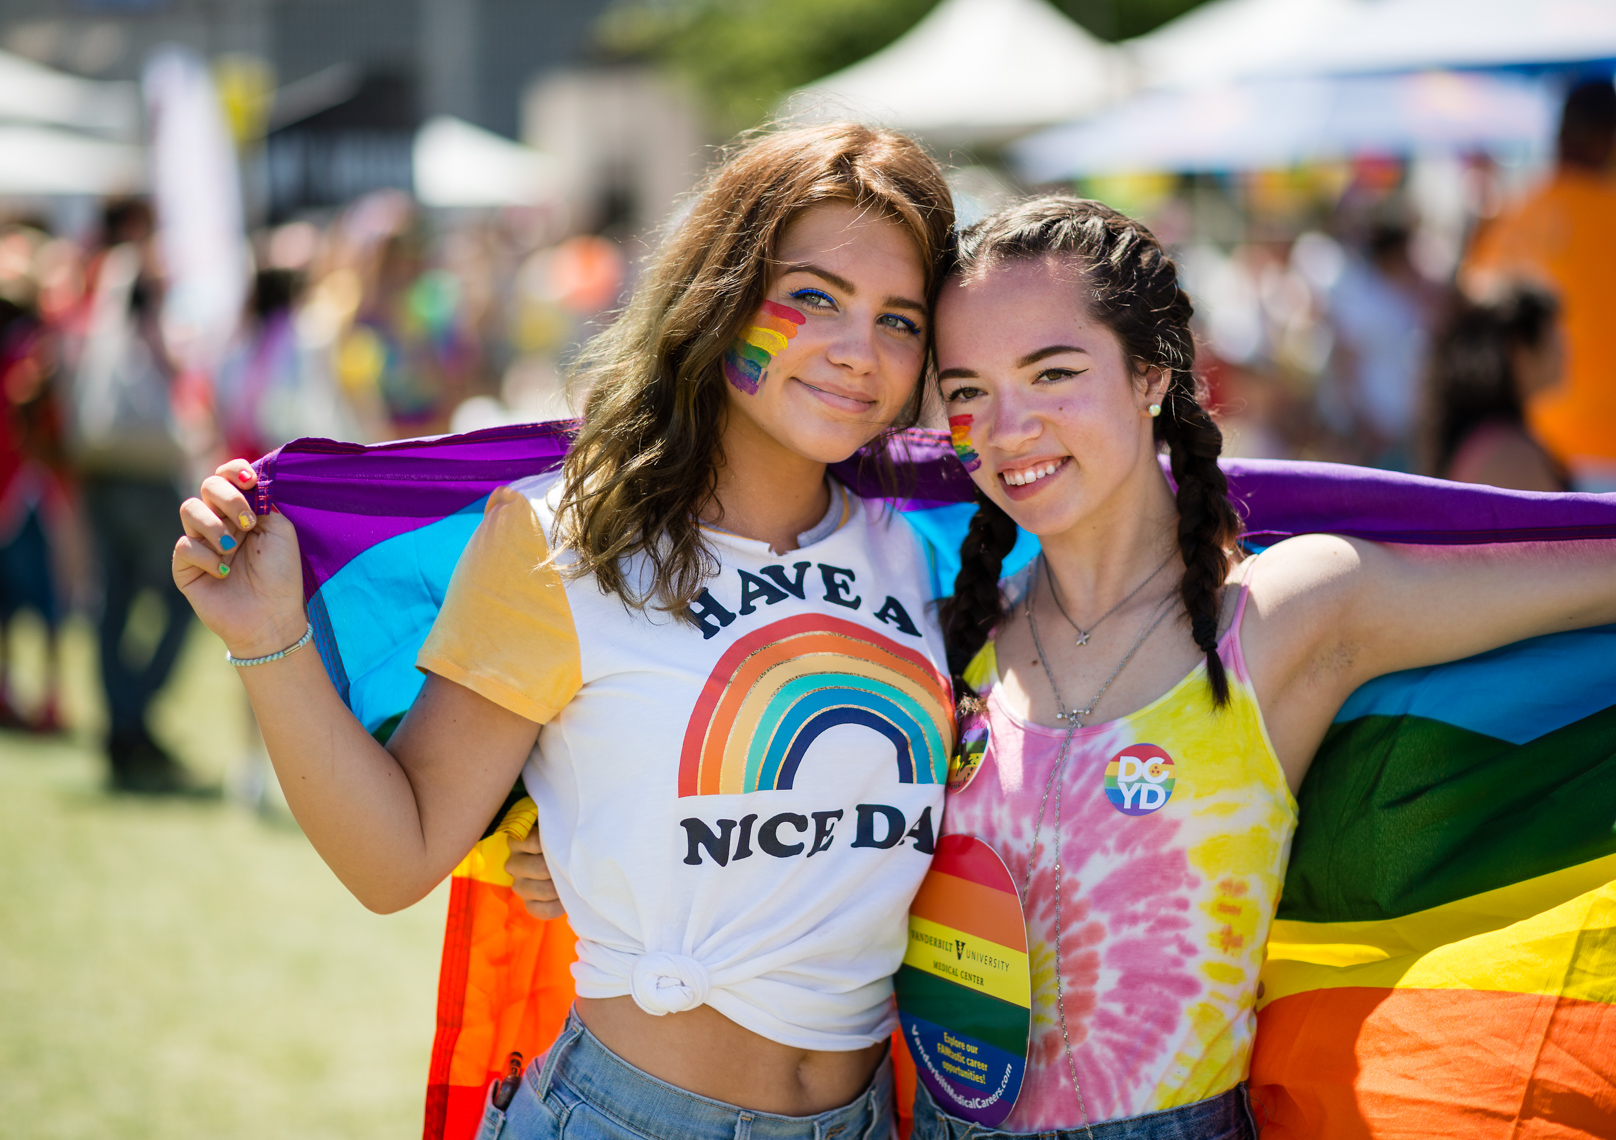 Nashville Pride Festival 2017 | Photographer + Director, Kristina Krug | authentic, authenticity, bisexual, celebrate, celebration, civil, civil liberties, courage, dancing, documentary, drag, emotions, equality, esteem, fearless, festival, festive, free, freedom, friends, fun, gay, happy, journalism, joy, joyful, Kristina Krug, krug photo, lesbian, LGBT, LGBTQ, liberty, love, love wins, loved, love is love, loveliness, lovers, love wins, men, National Pride Day, parade, people, photographer, photojournalism, photojournalist, Portrait, Predators, pride, Pride Parade, proud, queen, queer, relationship, reportage, respect, rights, safety, self, sexuality, summer, sun, sunny, teen girls students holding pride rainbow flag at Public Square Park